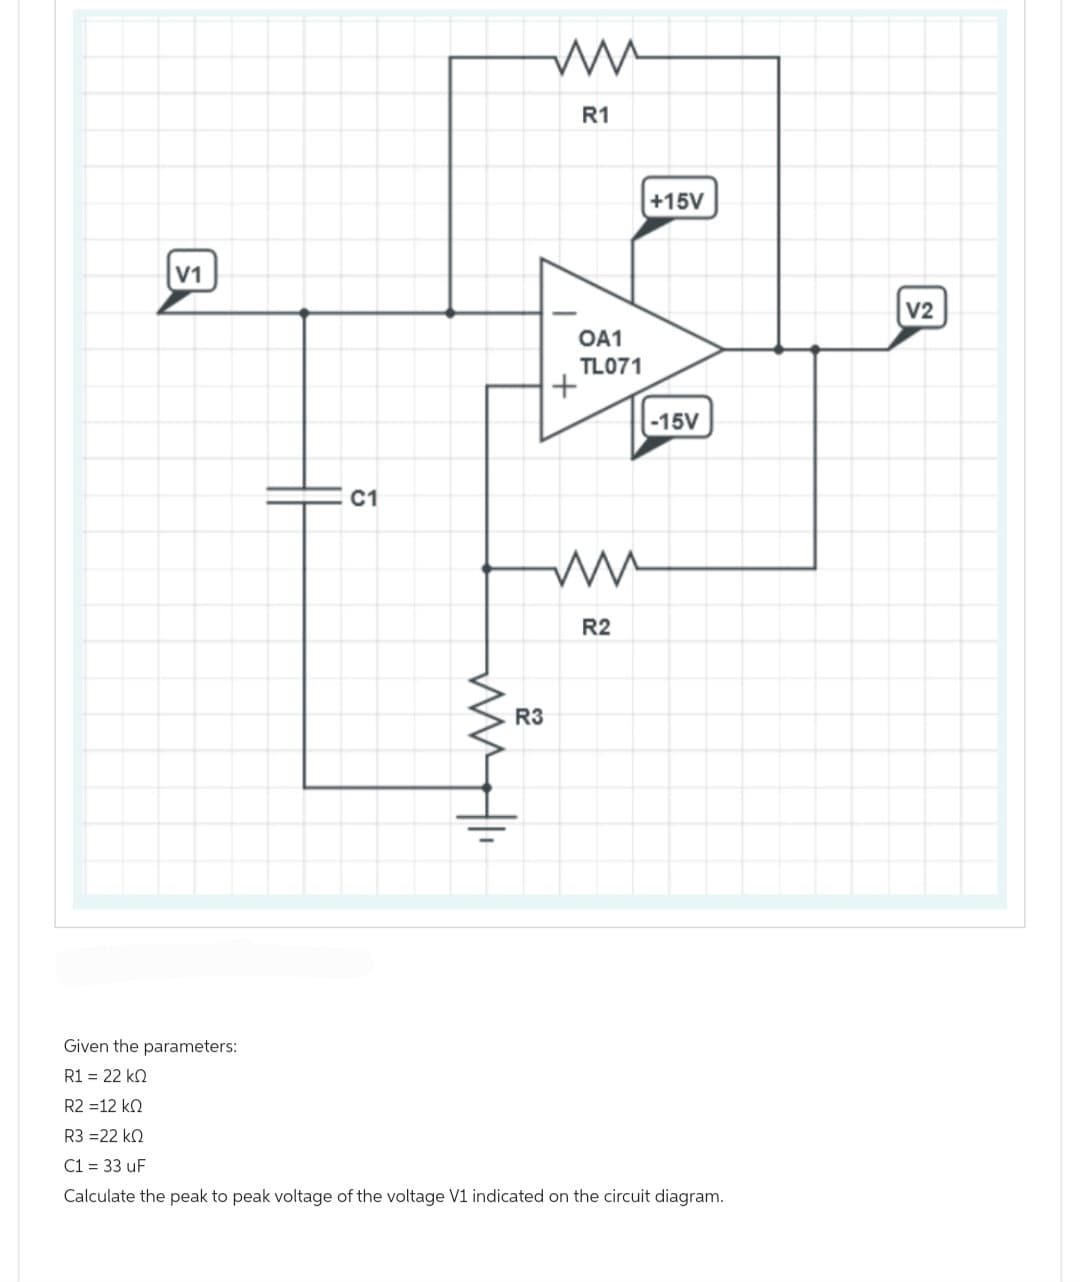 V1
C1
www.l
R3
mu
R1
OA1
TL071
+
ww
R2
+15V
-15V
Given the parameters:
R1 = 22 ΚΩ
R2 =12 ΚΩ
R3 =22 ΚΩ
C1 = 33 uF
Calculate the peak to peak voltage of the voltage V1 indicated on the circuit diagram.
|
V2